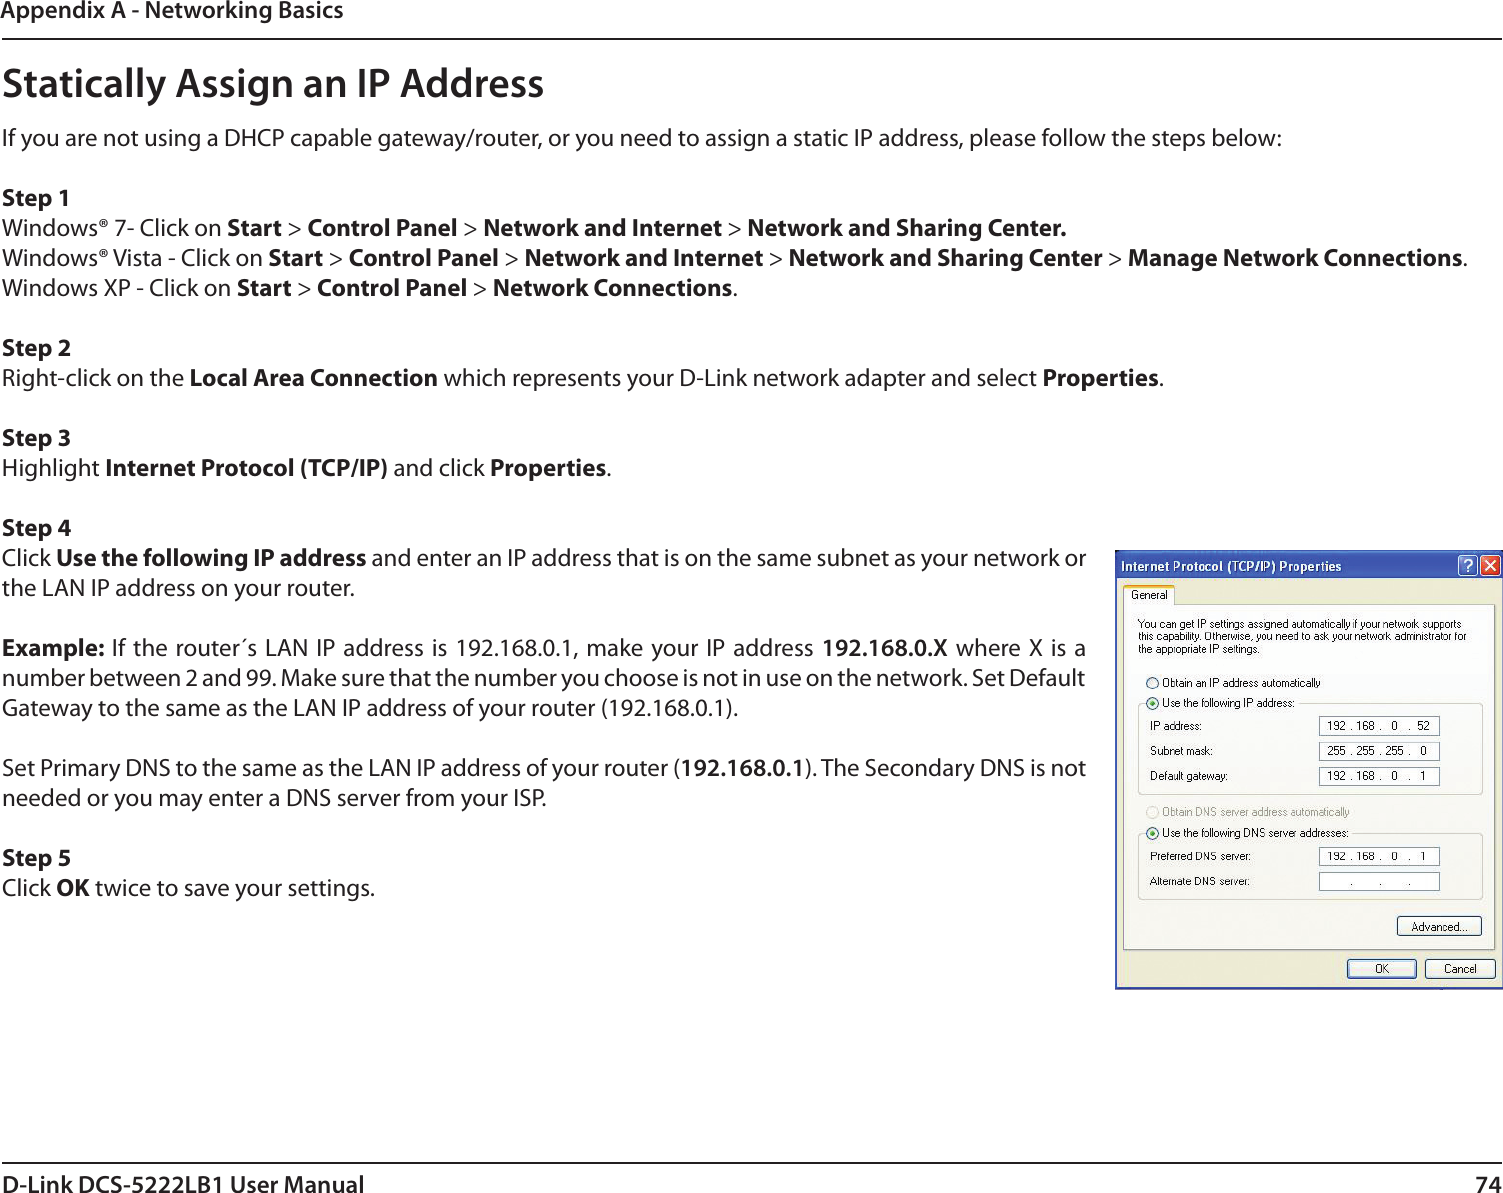 74D-Link DCS-5222LB1 User ManualAppendix A - Networking BasicsStatically Assign an IP AddressIf you are not using a DHCP capable gateway/router, or you need to assign a static IP address, please follow the steps below: Step 1Windows® 7- Click on Start &gt; Control Panel &gt; Network and Internet &gt; Network and Sharing Center.Windows® Vista - Click on Start &gt; Control Panel &gt; Network and Internet &gt; Network and Sharing Center &gt; Manage Network Connections. Windows XP - Click on Start &gt; Control Panel &gt; Network Connections. Step 2Right-click on the Local Area Connection which represents your D-Link network adapter and select Properties. Step 3Highlight Internet Protocol (TCP/IP) and click Properties. Step 4Click Use the following IP address and enter an IP address that is on the same subnet as your network or the LAN IP address on your router. Example: If the  router´s LAN  IP address is 192.168.0.1, make your IP address 192.168.0.X where X is a number between 2 and 99. Make sure that the number you choose is not in use on the network. Set Default Gateway to the same as the LAN IP address of your router (192.168.0.1). Set Primary DNS to the same as the LAN IP address of your router (192.168.0.1). The Secondary DNS is not needed or you may enter a DNS server from your ISP. Step 5Click OK twice to save your settings.